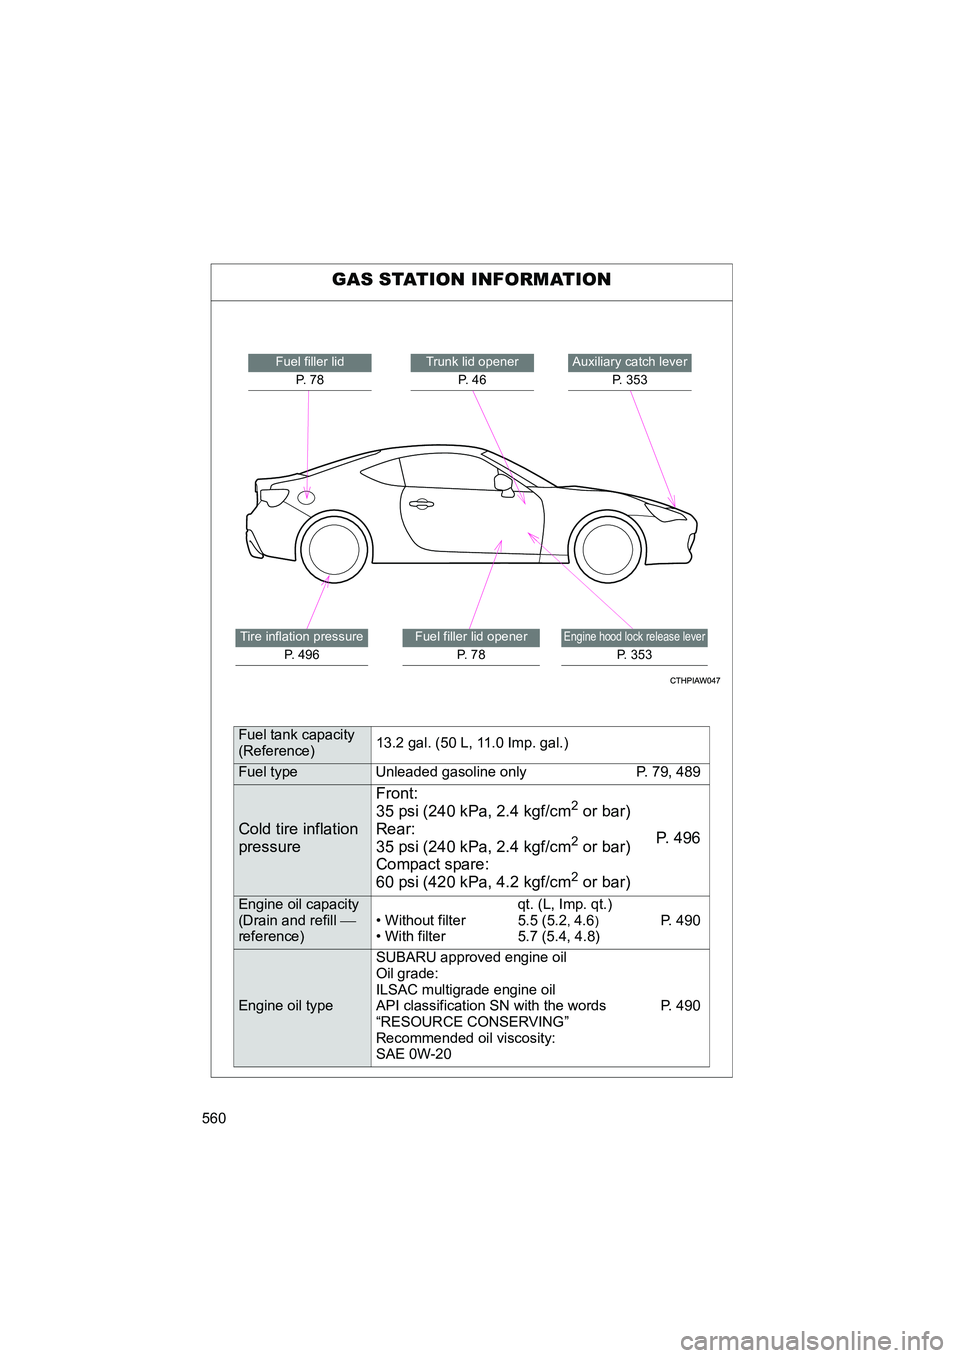 SUBARU BRZ 2019  Owners Manual 560
BRZ_U
GAS STATION INFORMATION
Auxiliary catch leverP. 353Trunk lid openerP.  4 6
Engine hood lock release lever
P. 353
Fuel filler lidP.  7 8
Tire inflation pressure P. 496Fuel filler lid openerP.